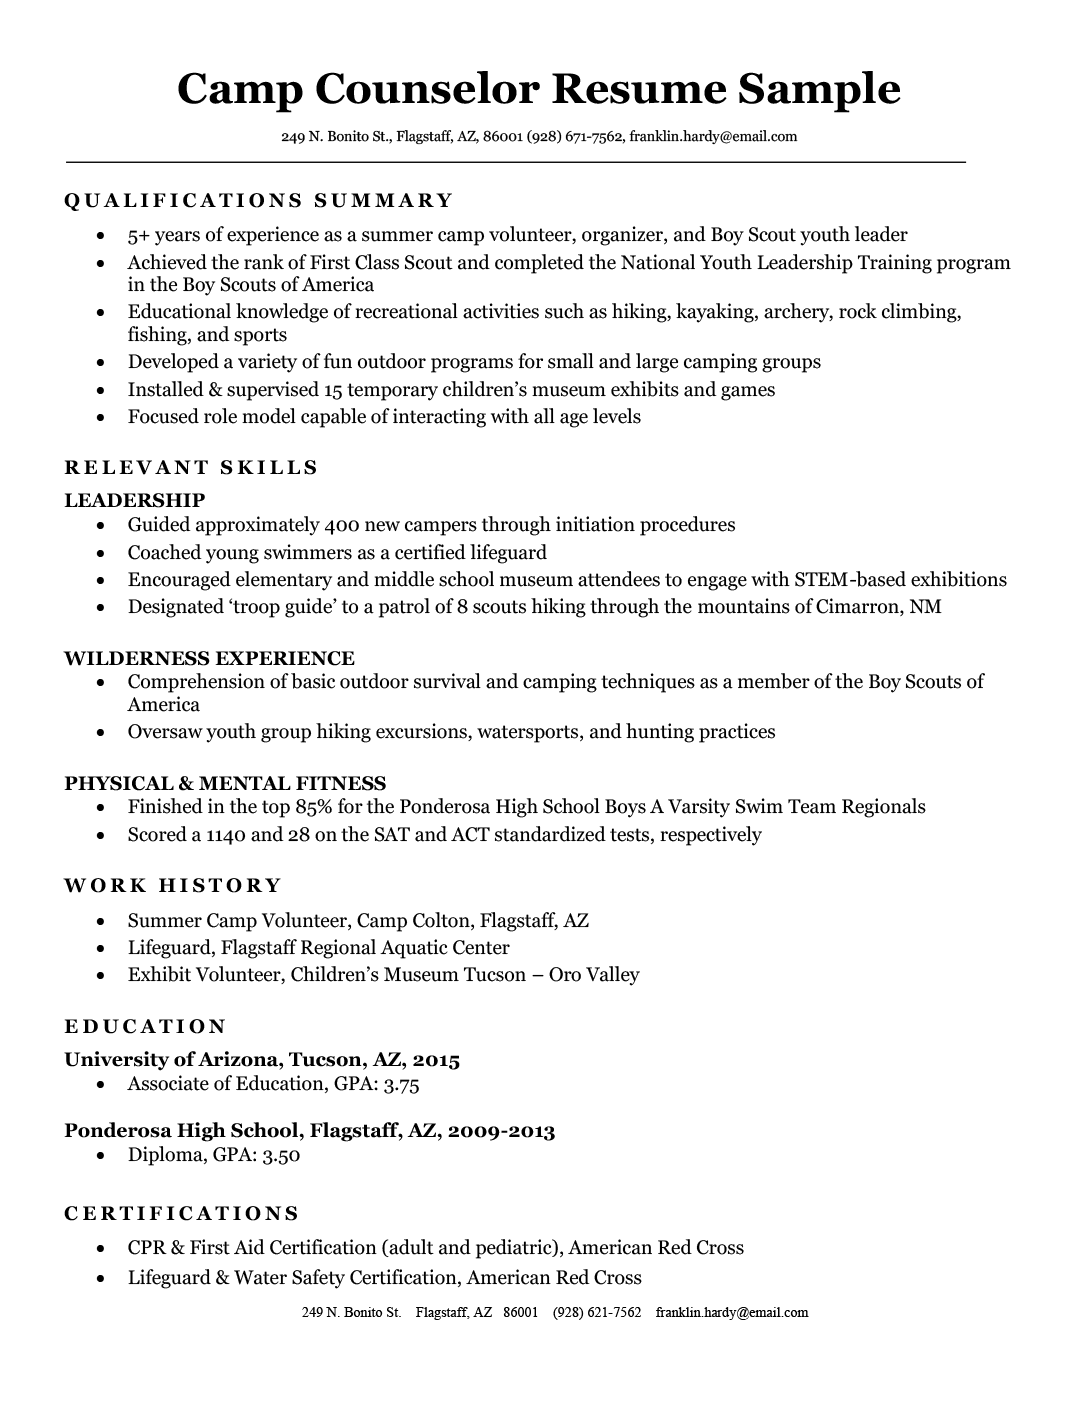 Camp counselor resume sample